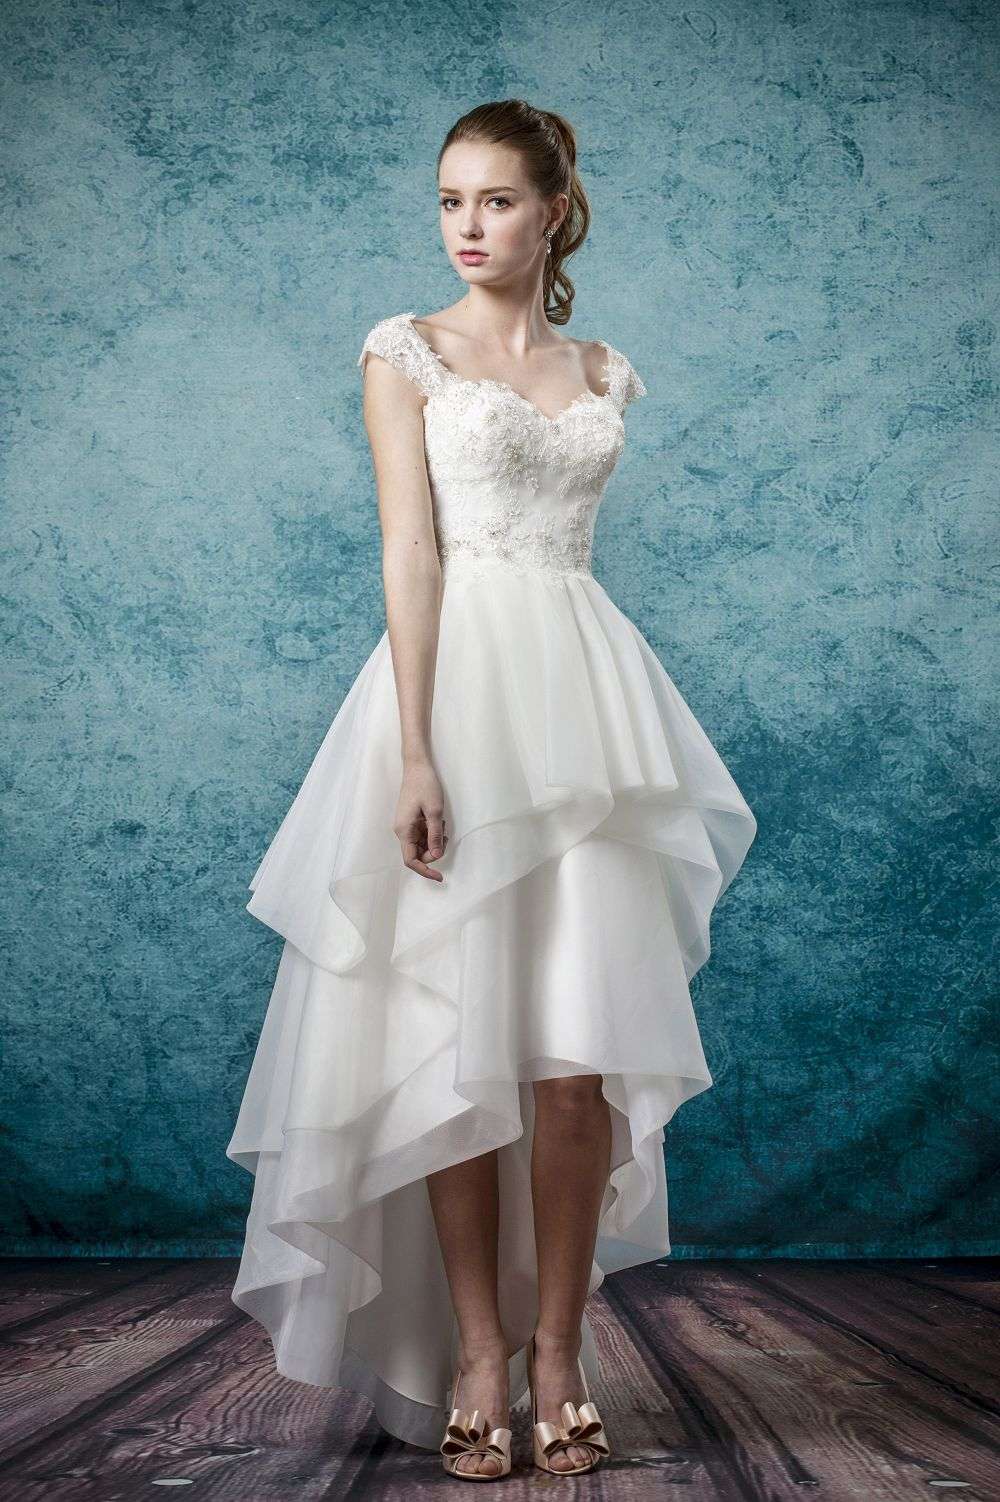 Win a Made-to-Measure Wedding Dress from Leis Atelier! (5)